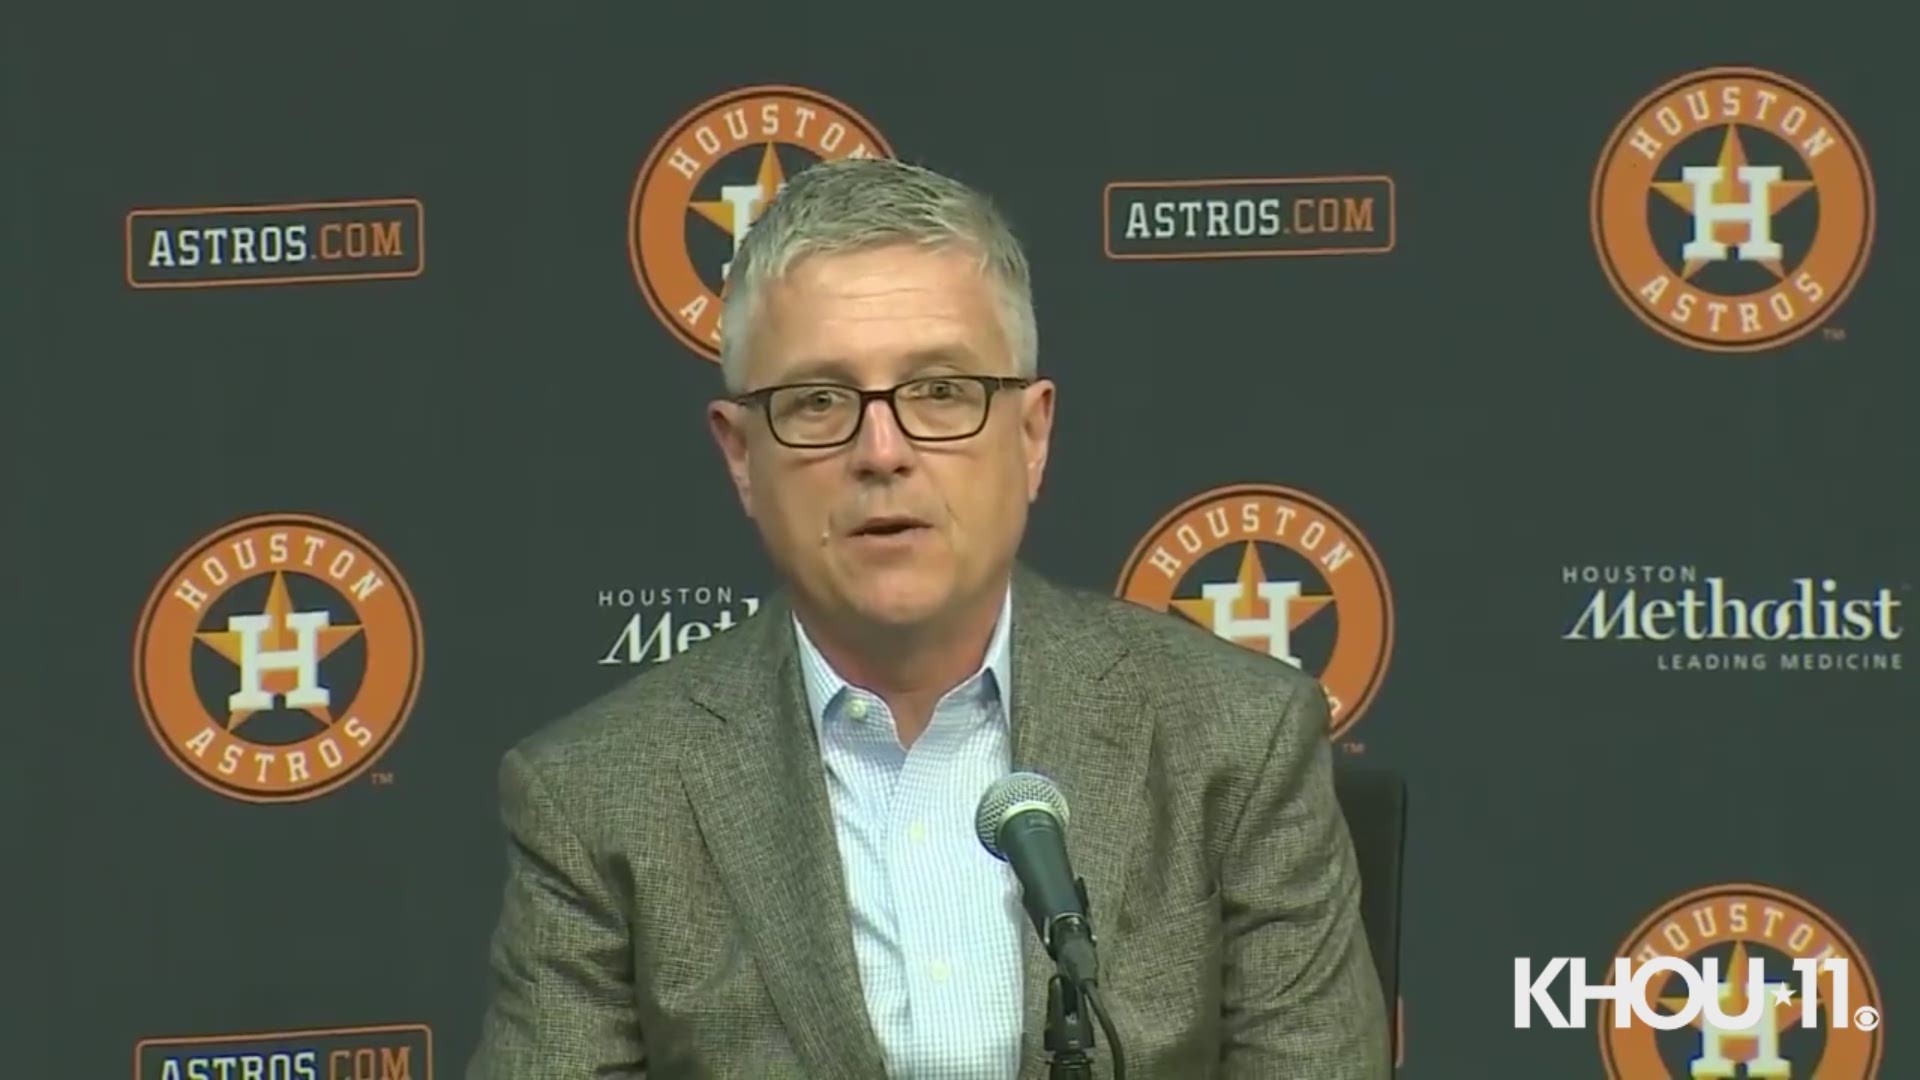 Astros General Manager Jeff Luhnow responds to Gerrit Cole's tweet, which was an open letter to Houston.